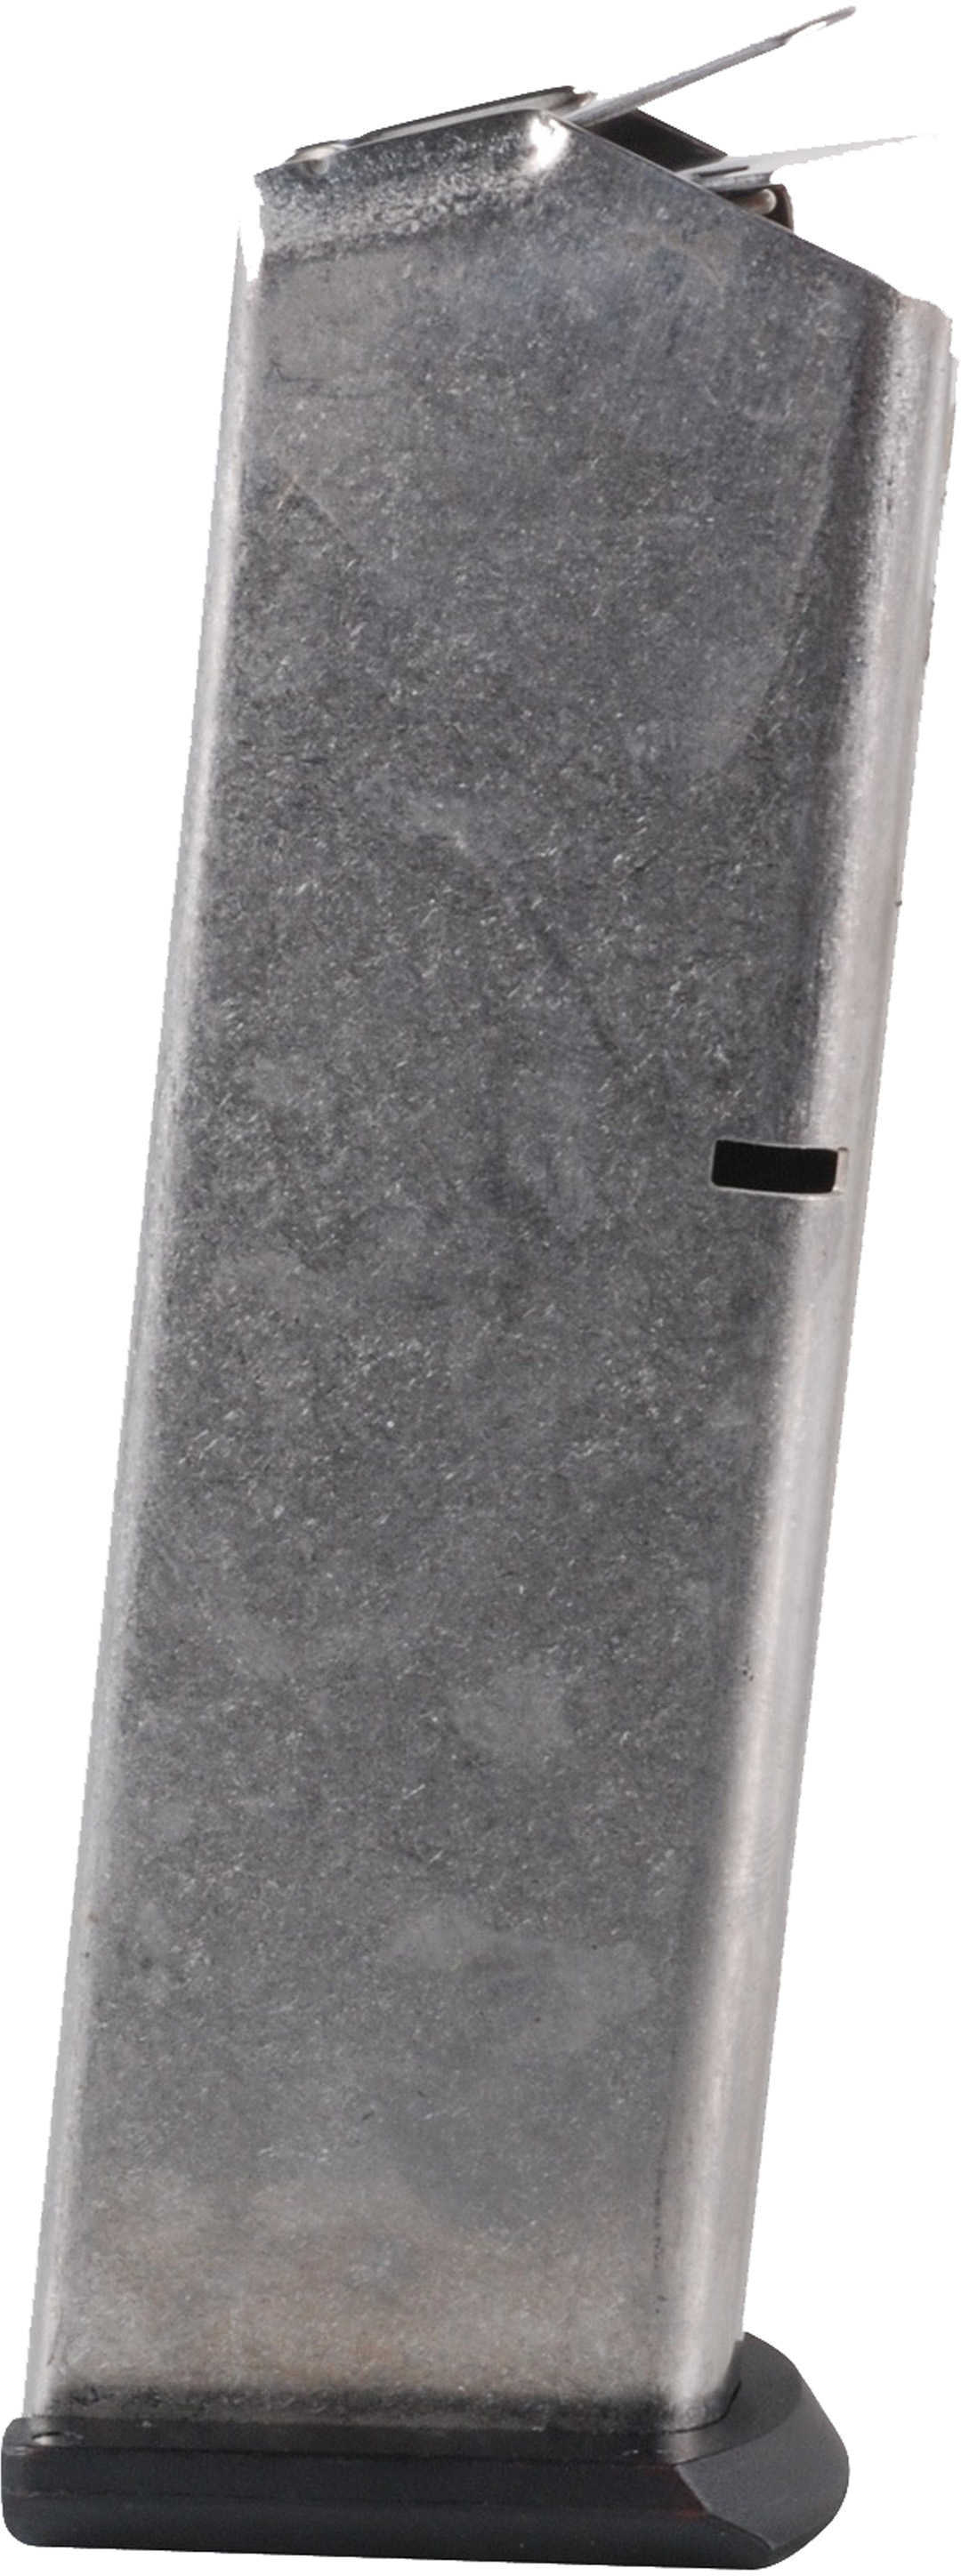 Ruger® Magazine P345 45 Acp 8rd Blue